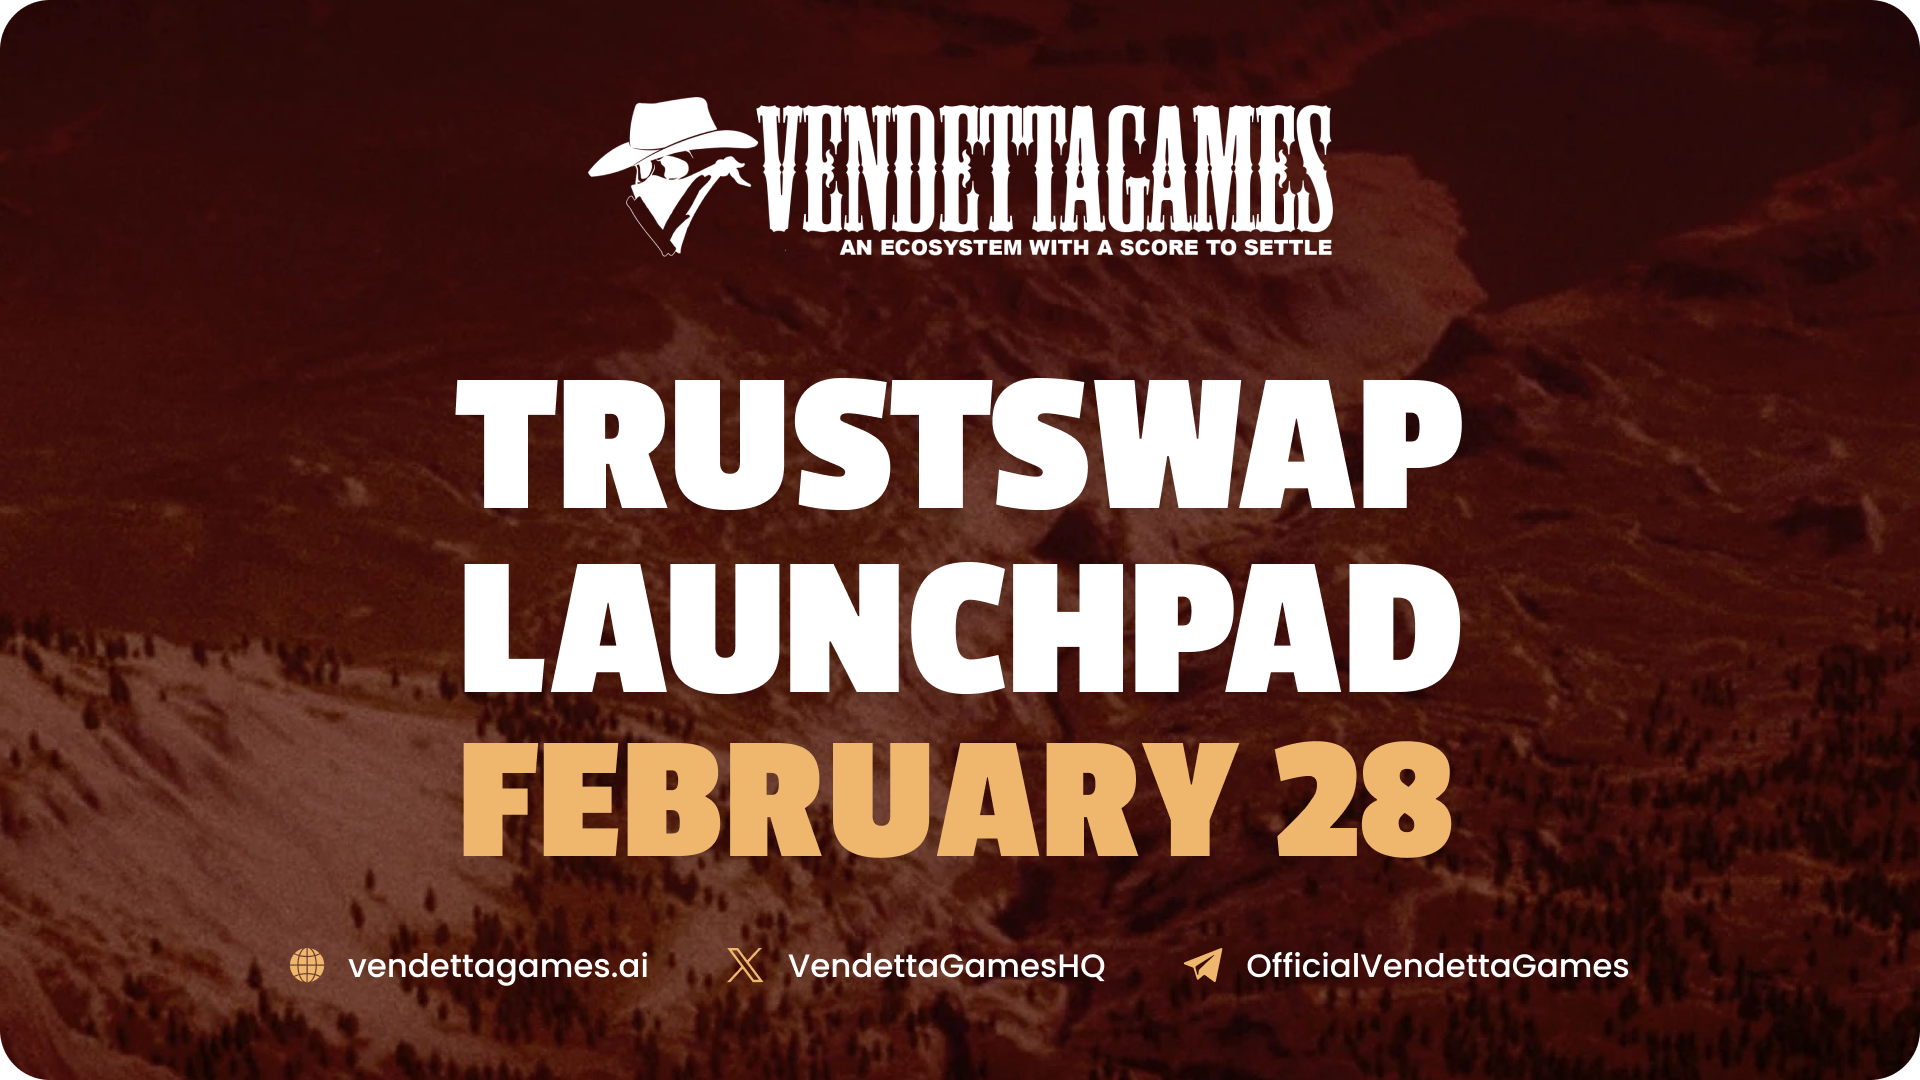 Vendetta Games Announces $VDT Token Offering February 28th on TrustSwap Launchpad